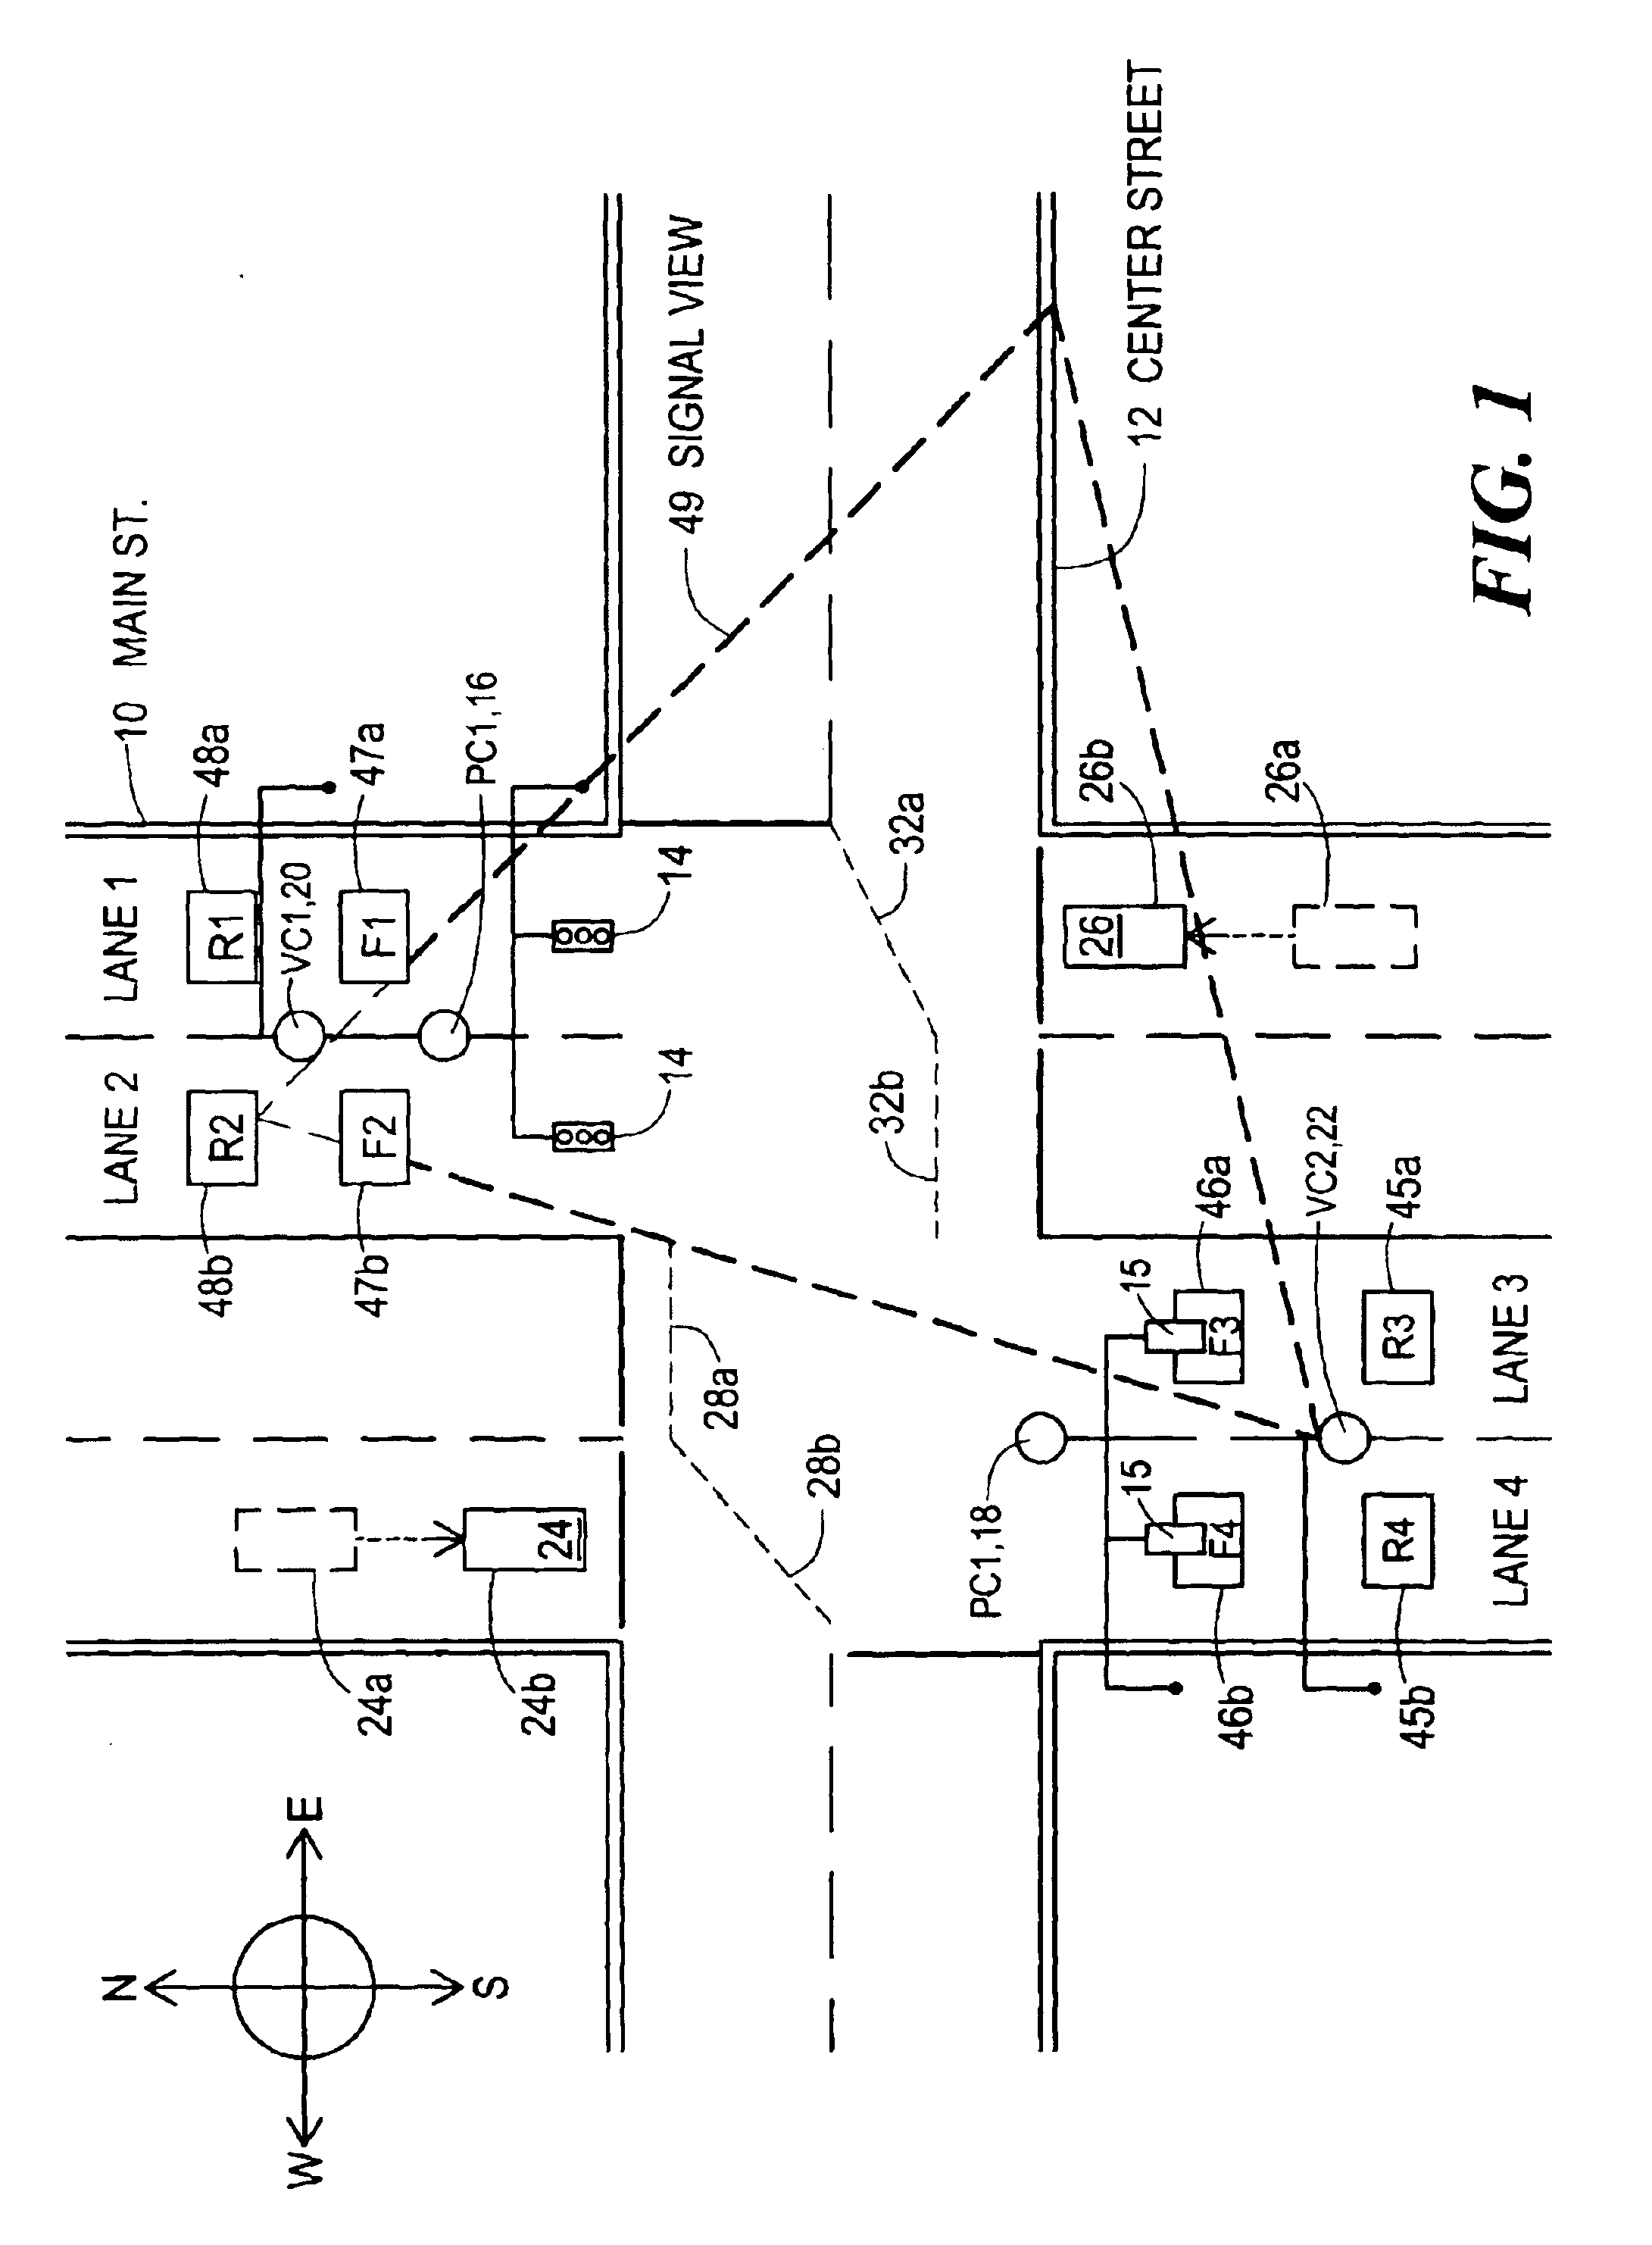 Traffic violation detection at an intersection employing a virtual violation line